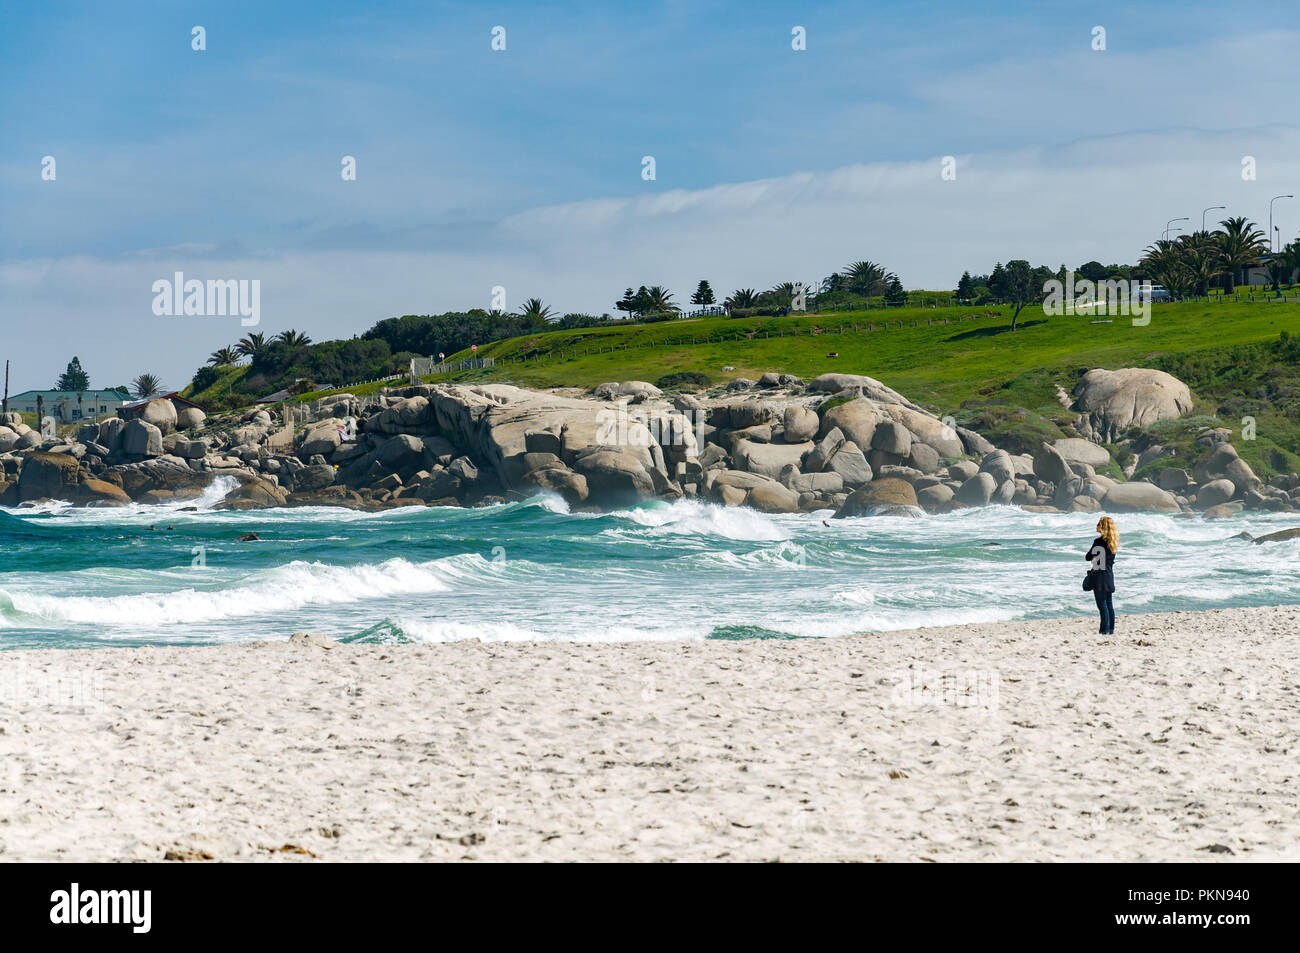 Lone woman on a beach looking out to sea, South Atlantic ocean, Camps Bay, South Africa Stock Photo